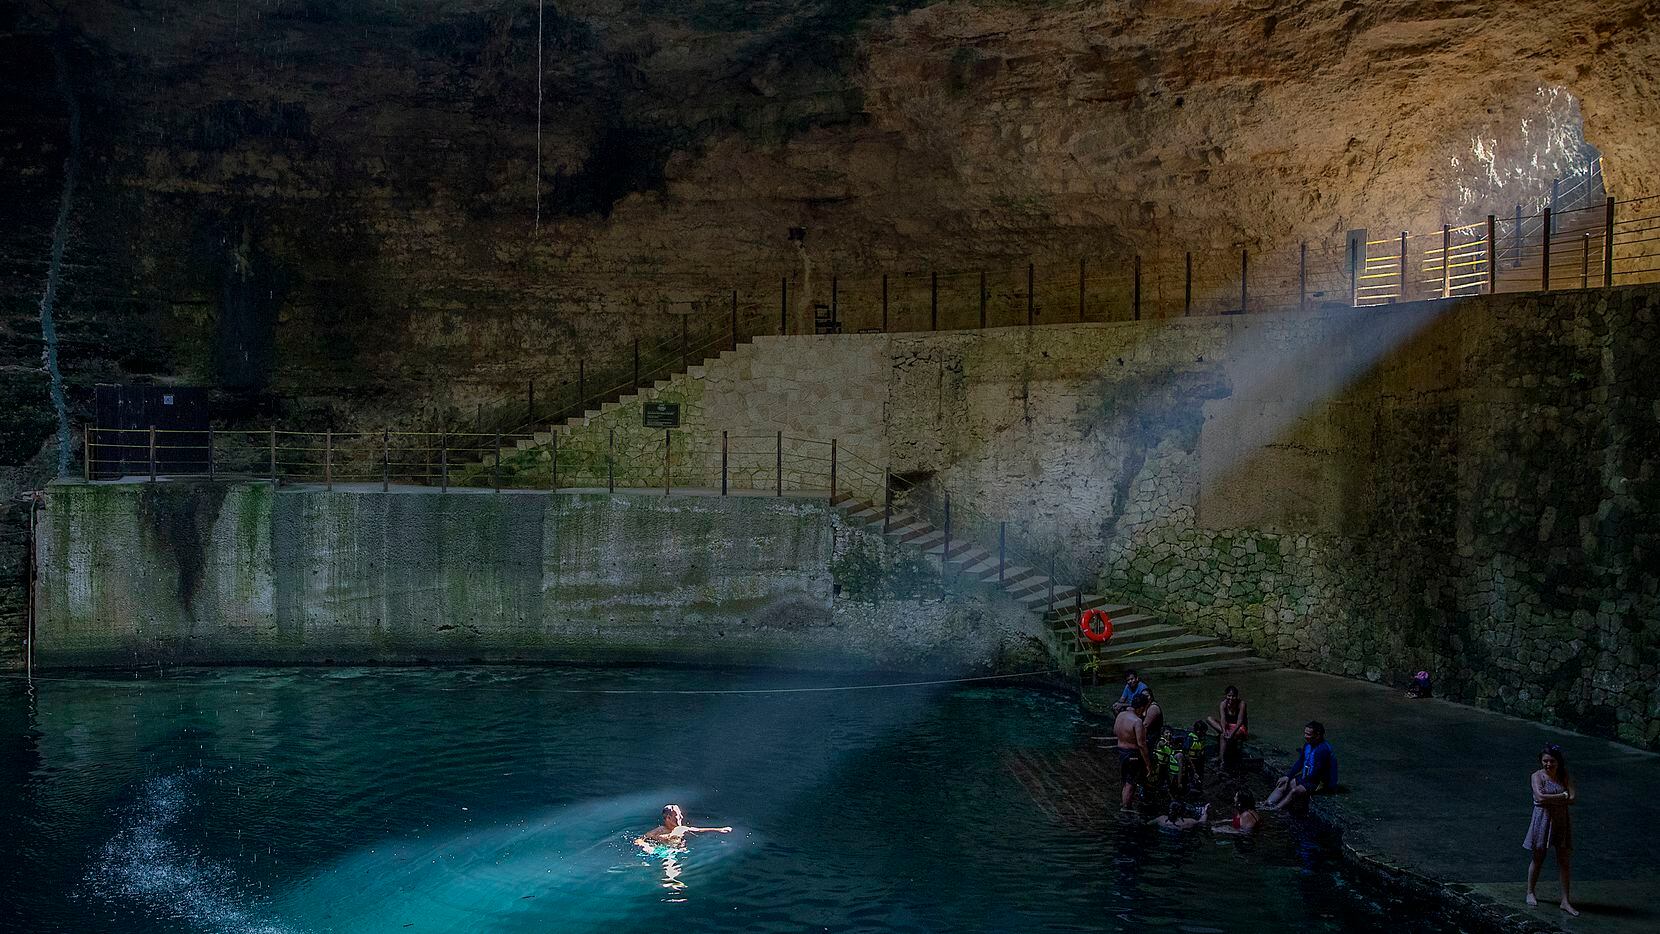 Sunlight shines on the water in Cenote Hubiku. The former Mayan sacred site in Valladolid, Mexico, has a maximum depth of 150 feet.